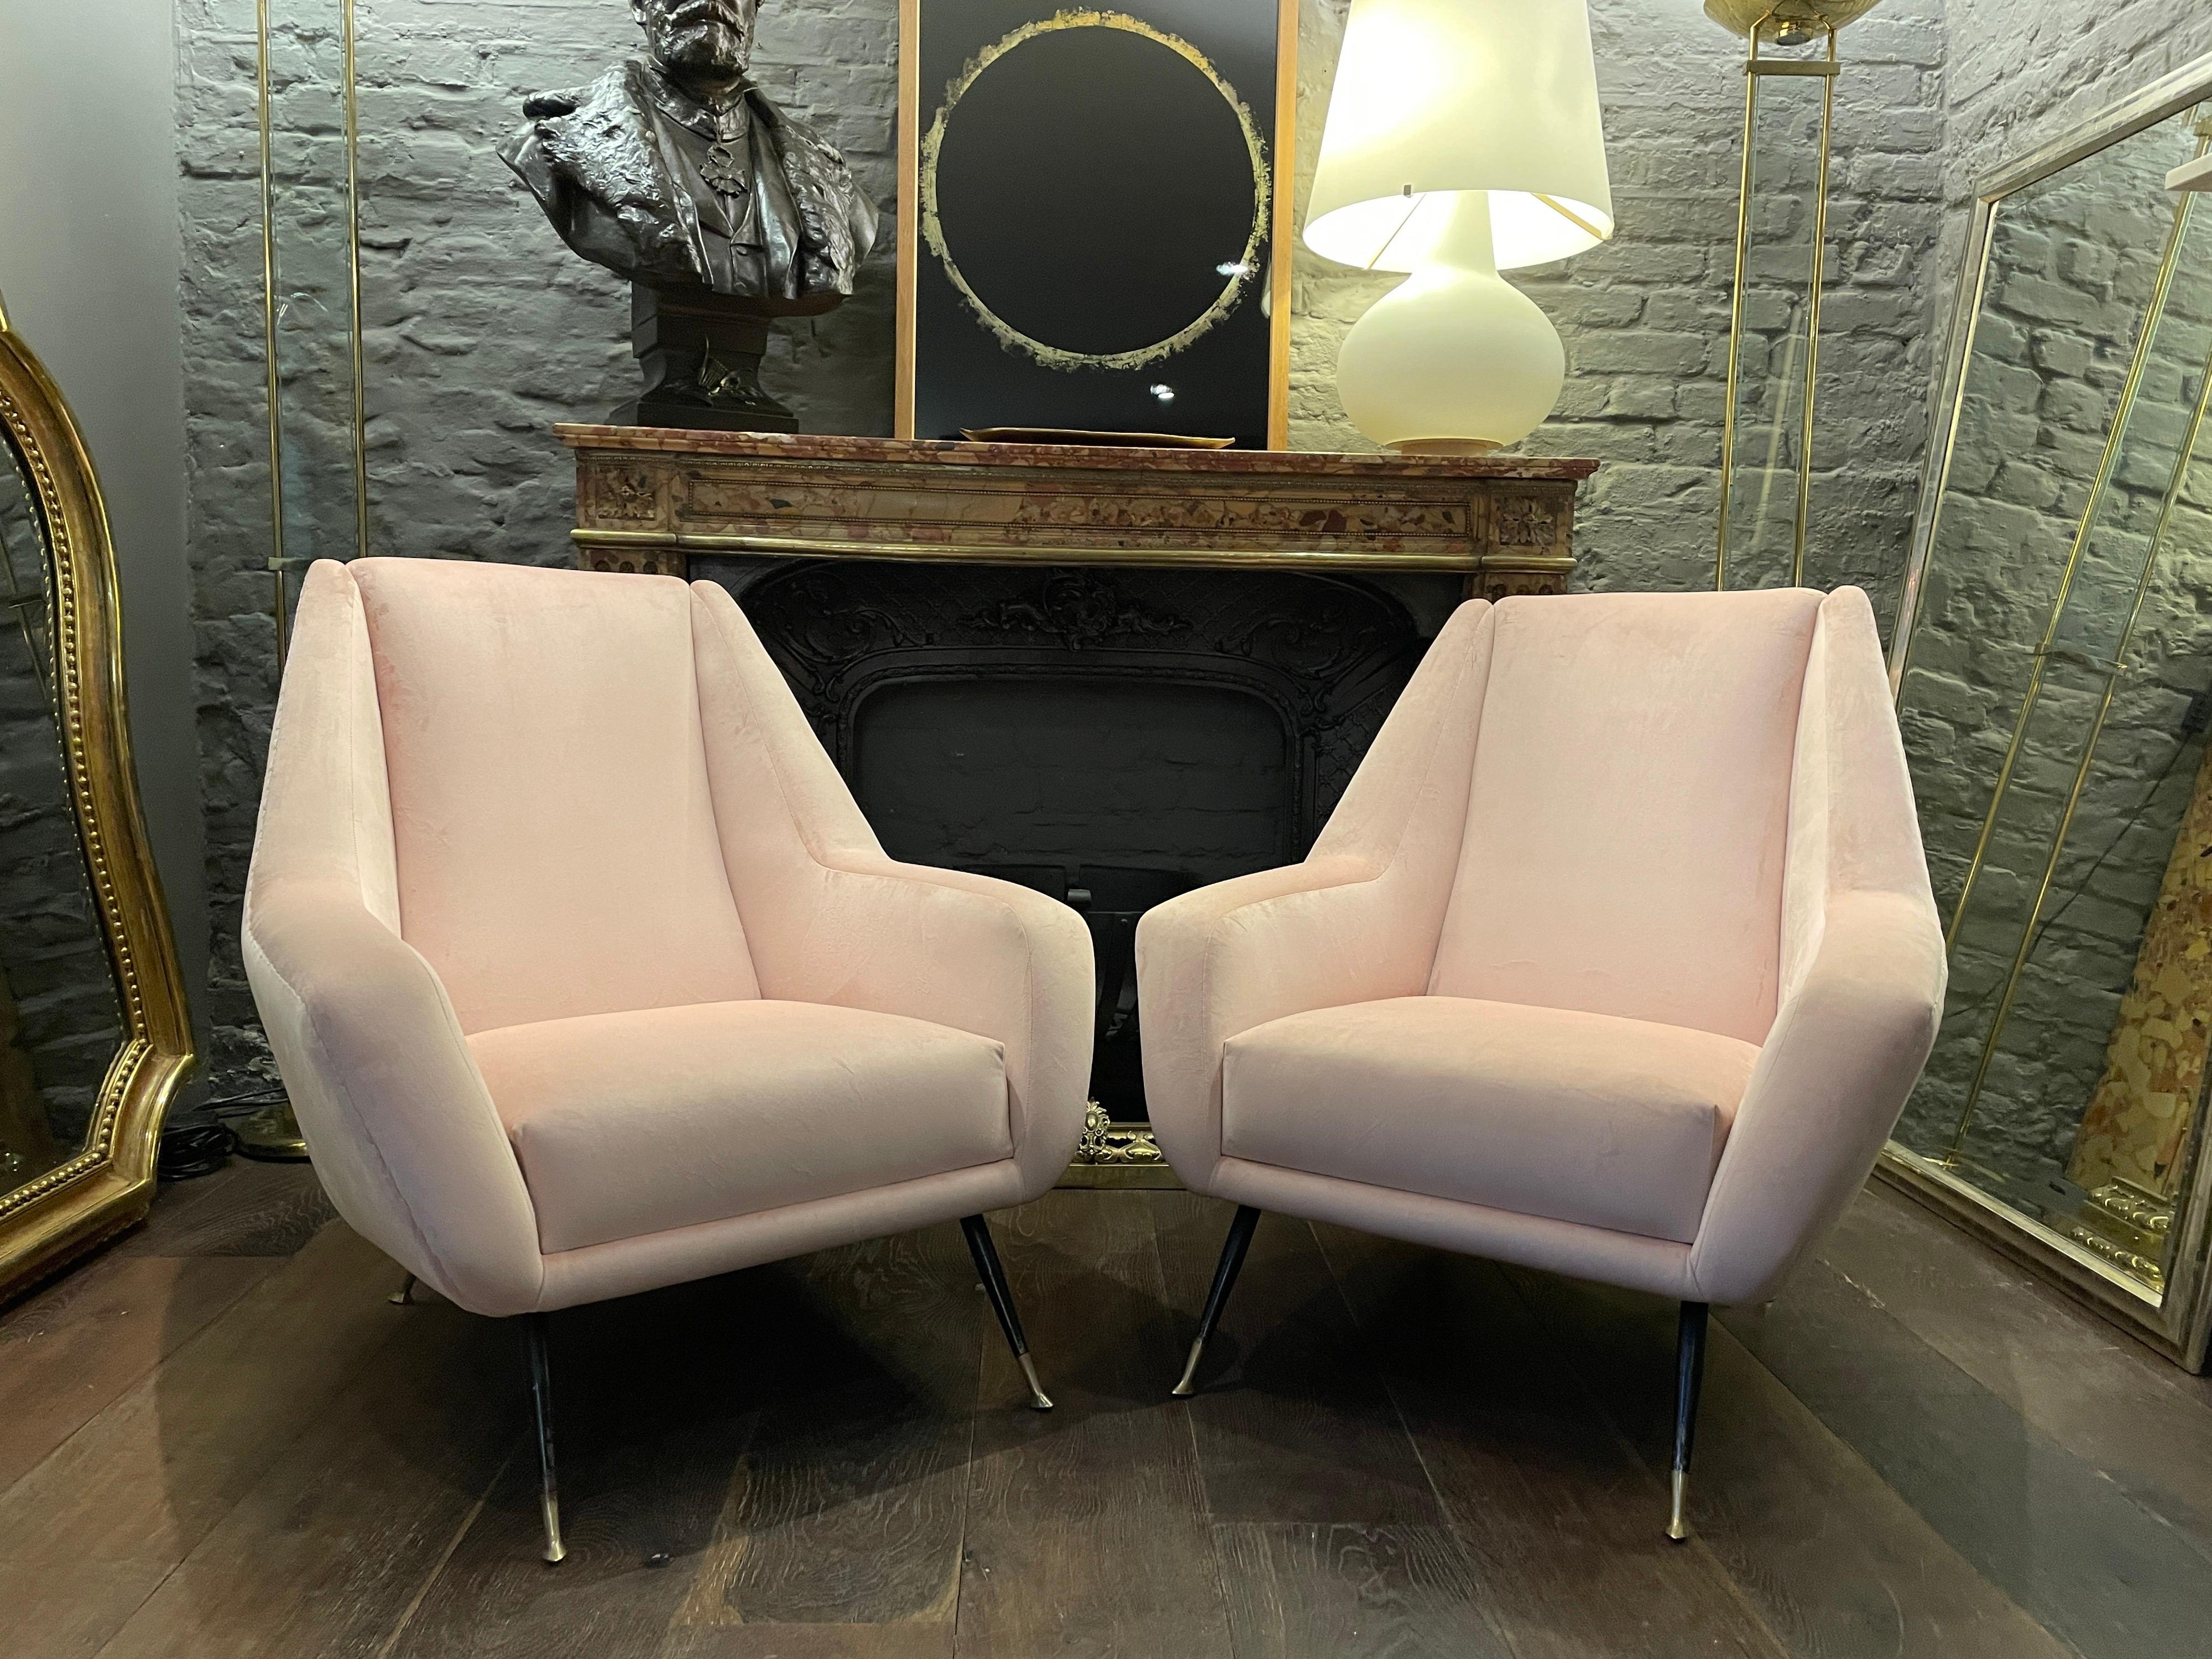 A Pair of Italian mid-century arm or lounge chairs. Newly re upholstered in blush pink velvet. The black steel legs with brass sabot feet. Large and comfortable.

Circa 1950.